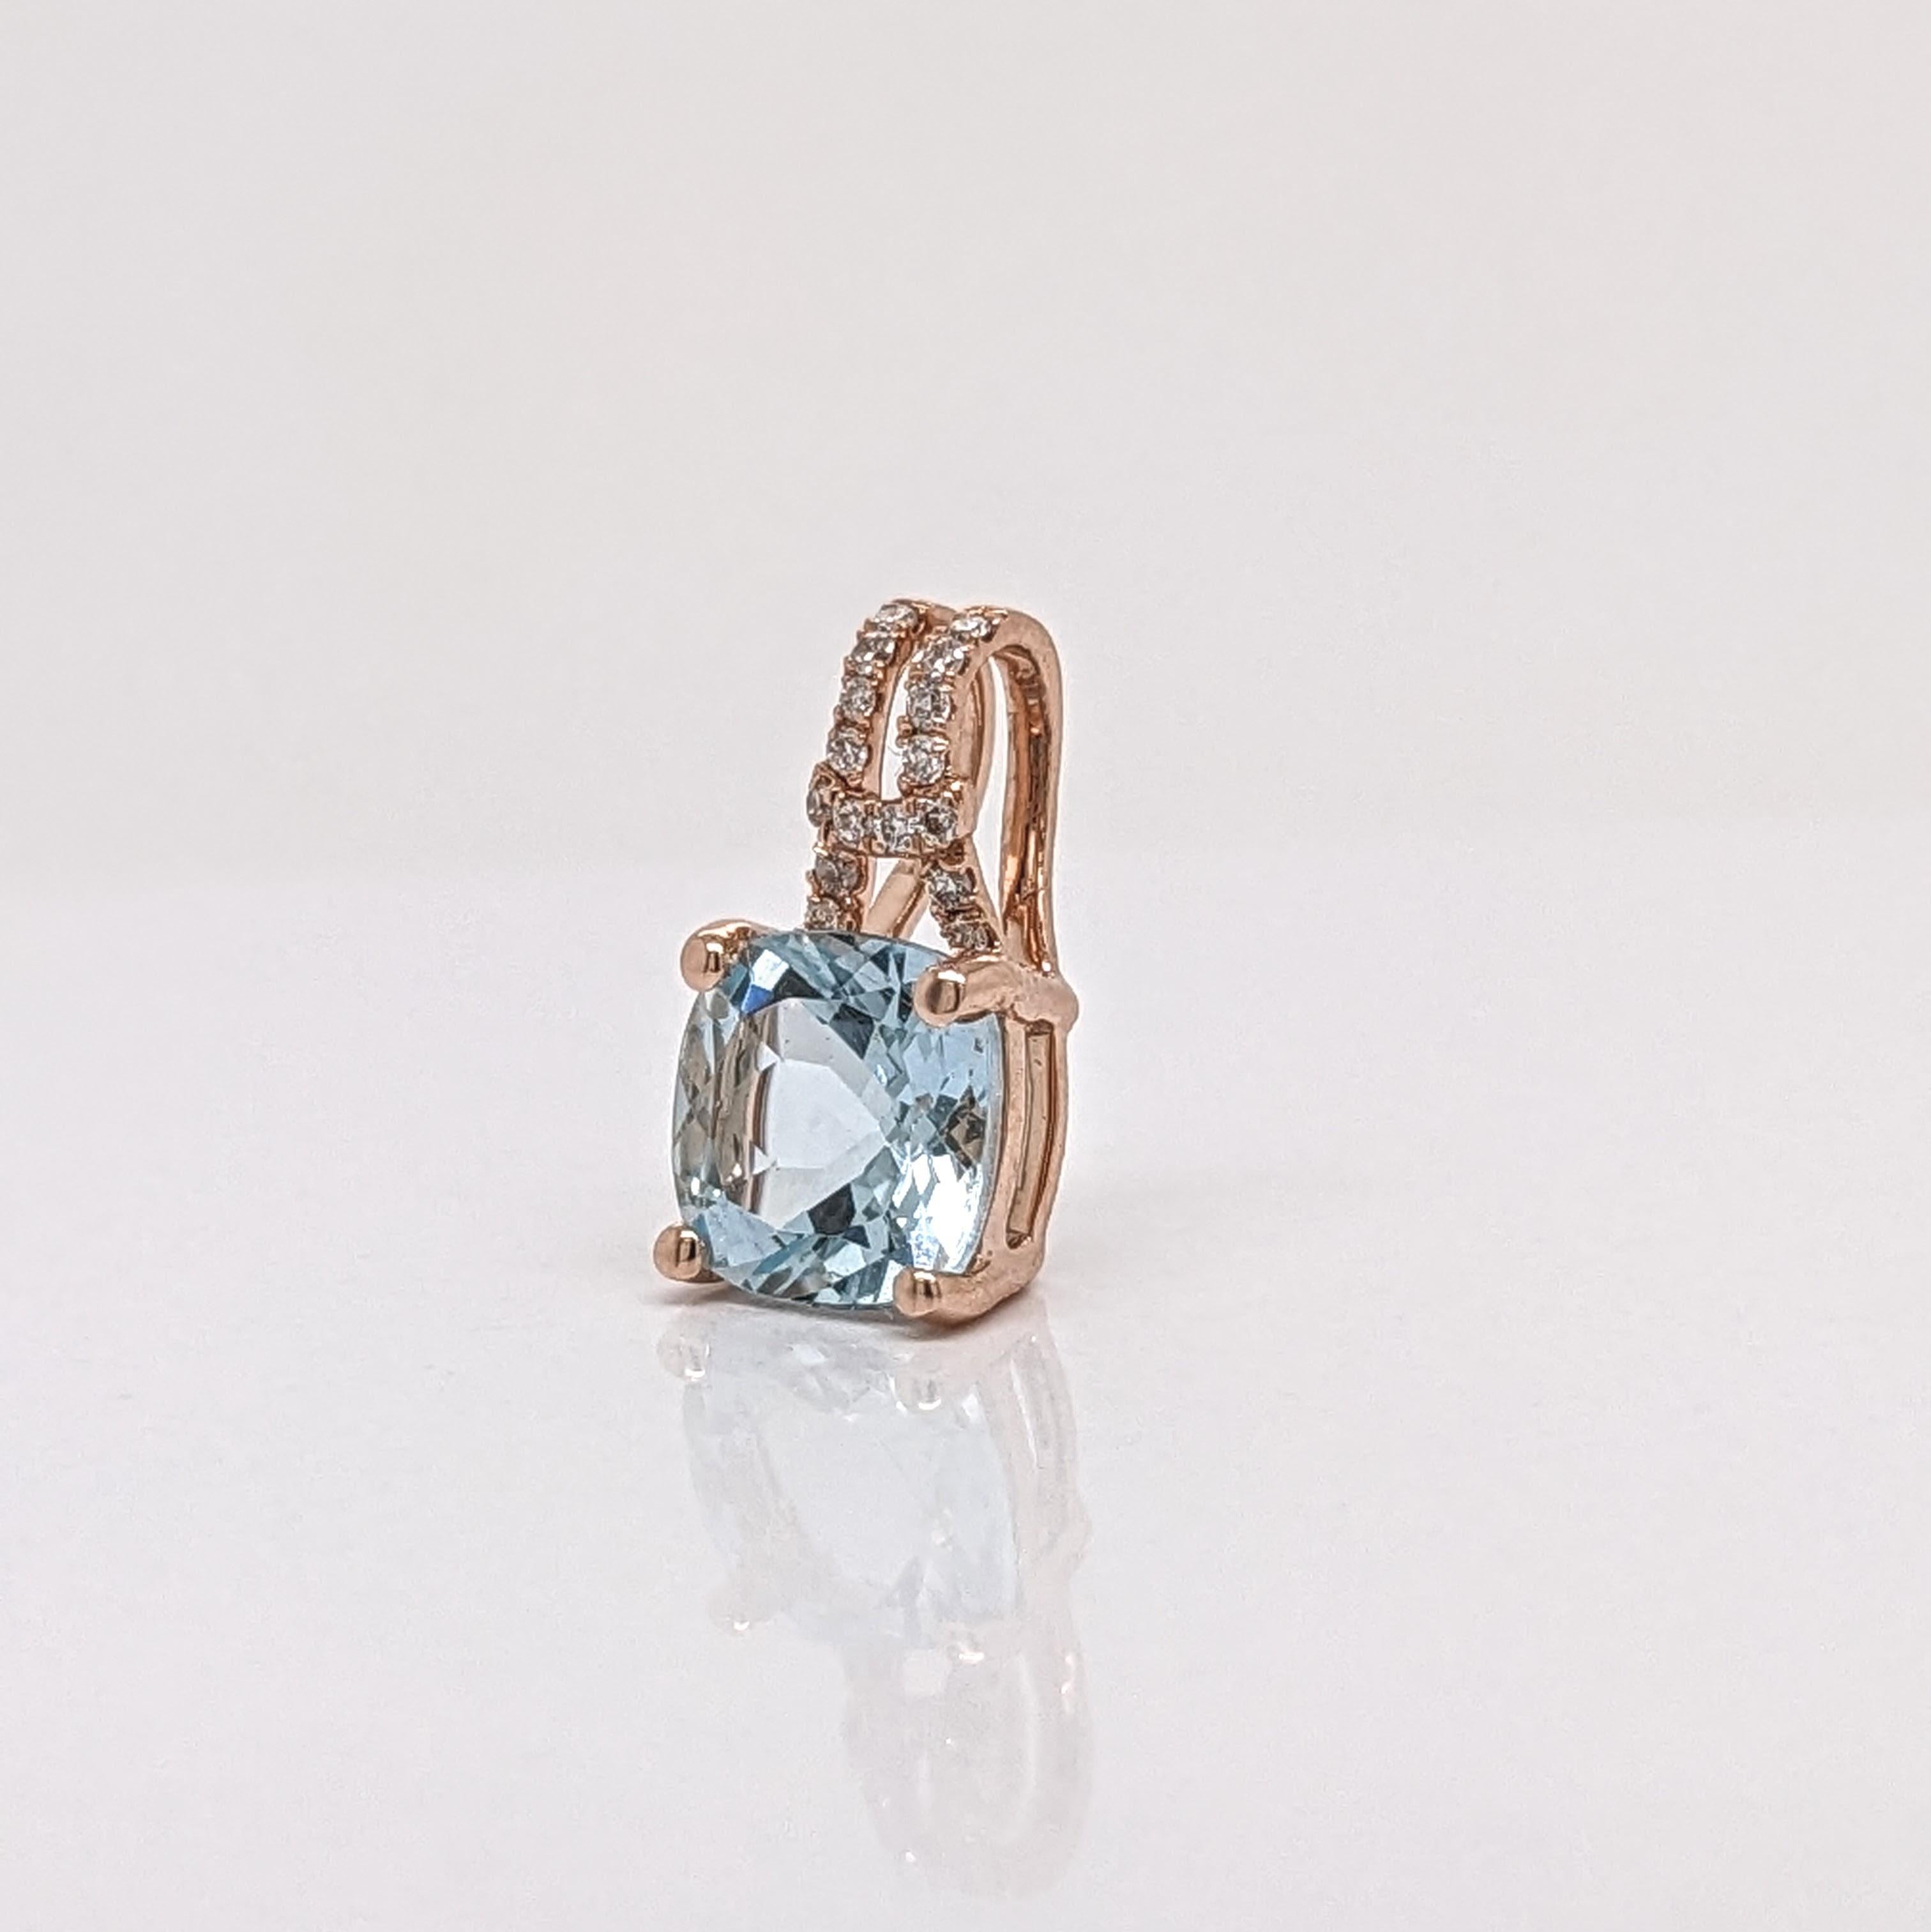 This adorable pendant showcases a 5x3mm cushion cut aquamarine set in a diamond accented pendant in solid 14k rose gold. A lovely design for your daily wear! This pendant also makes a beautiful March birthstone pendant for your loved